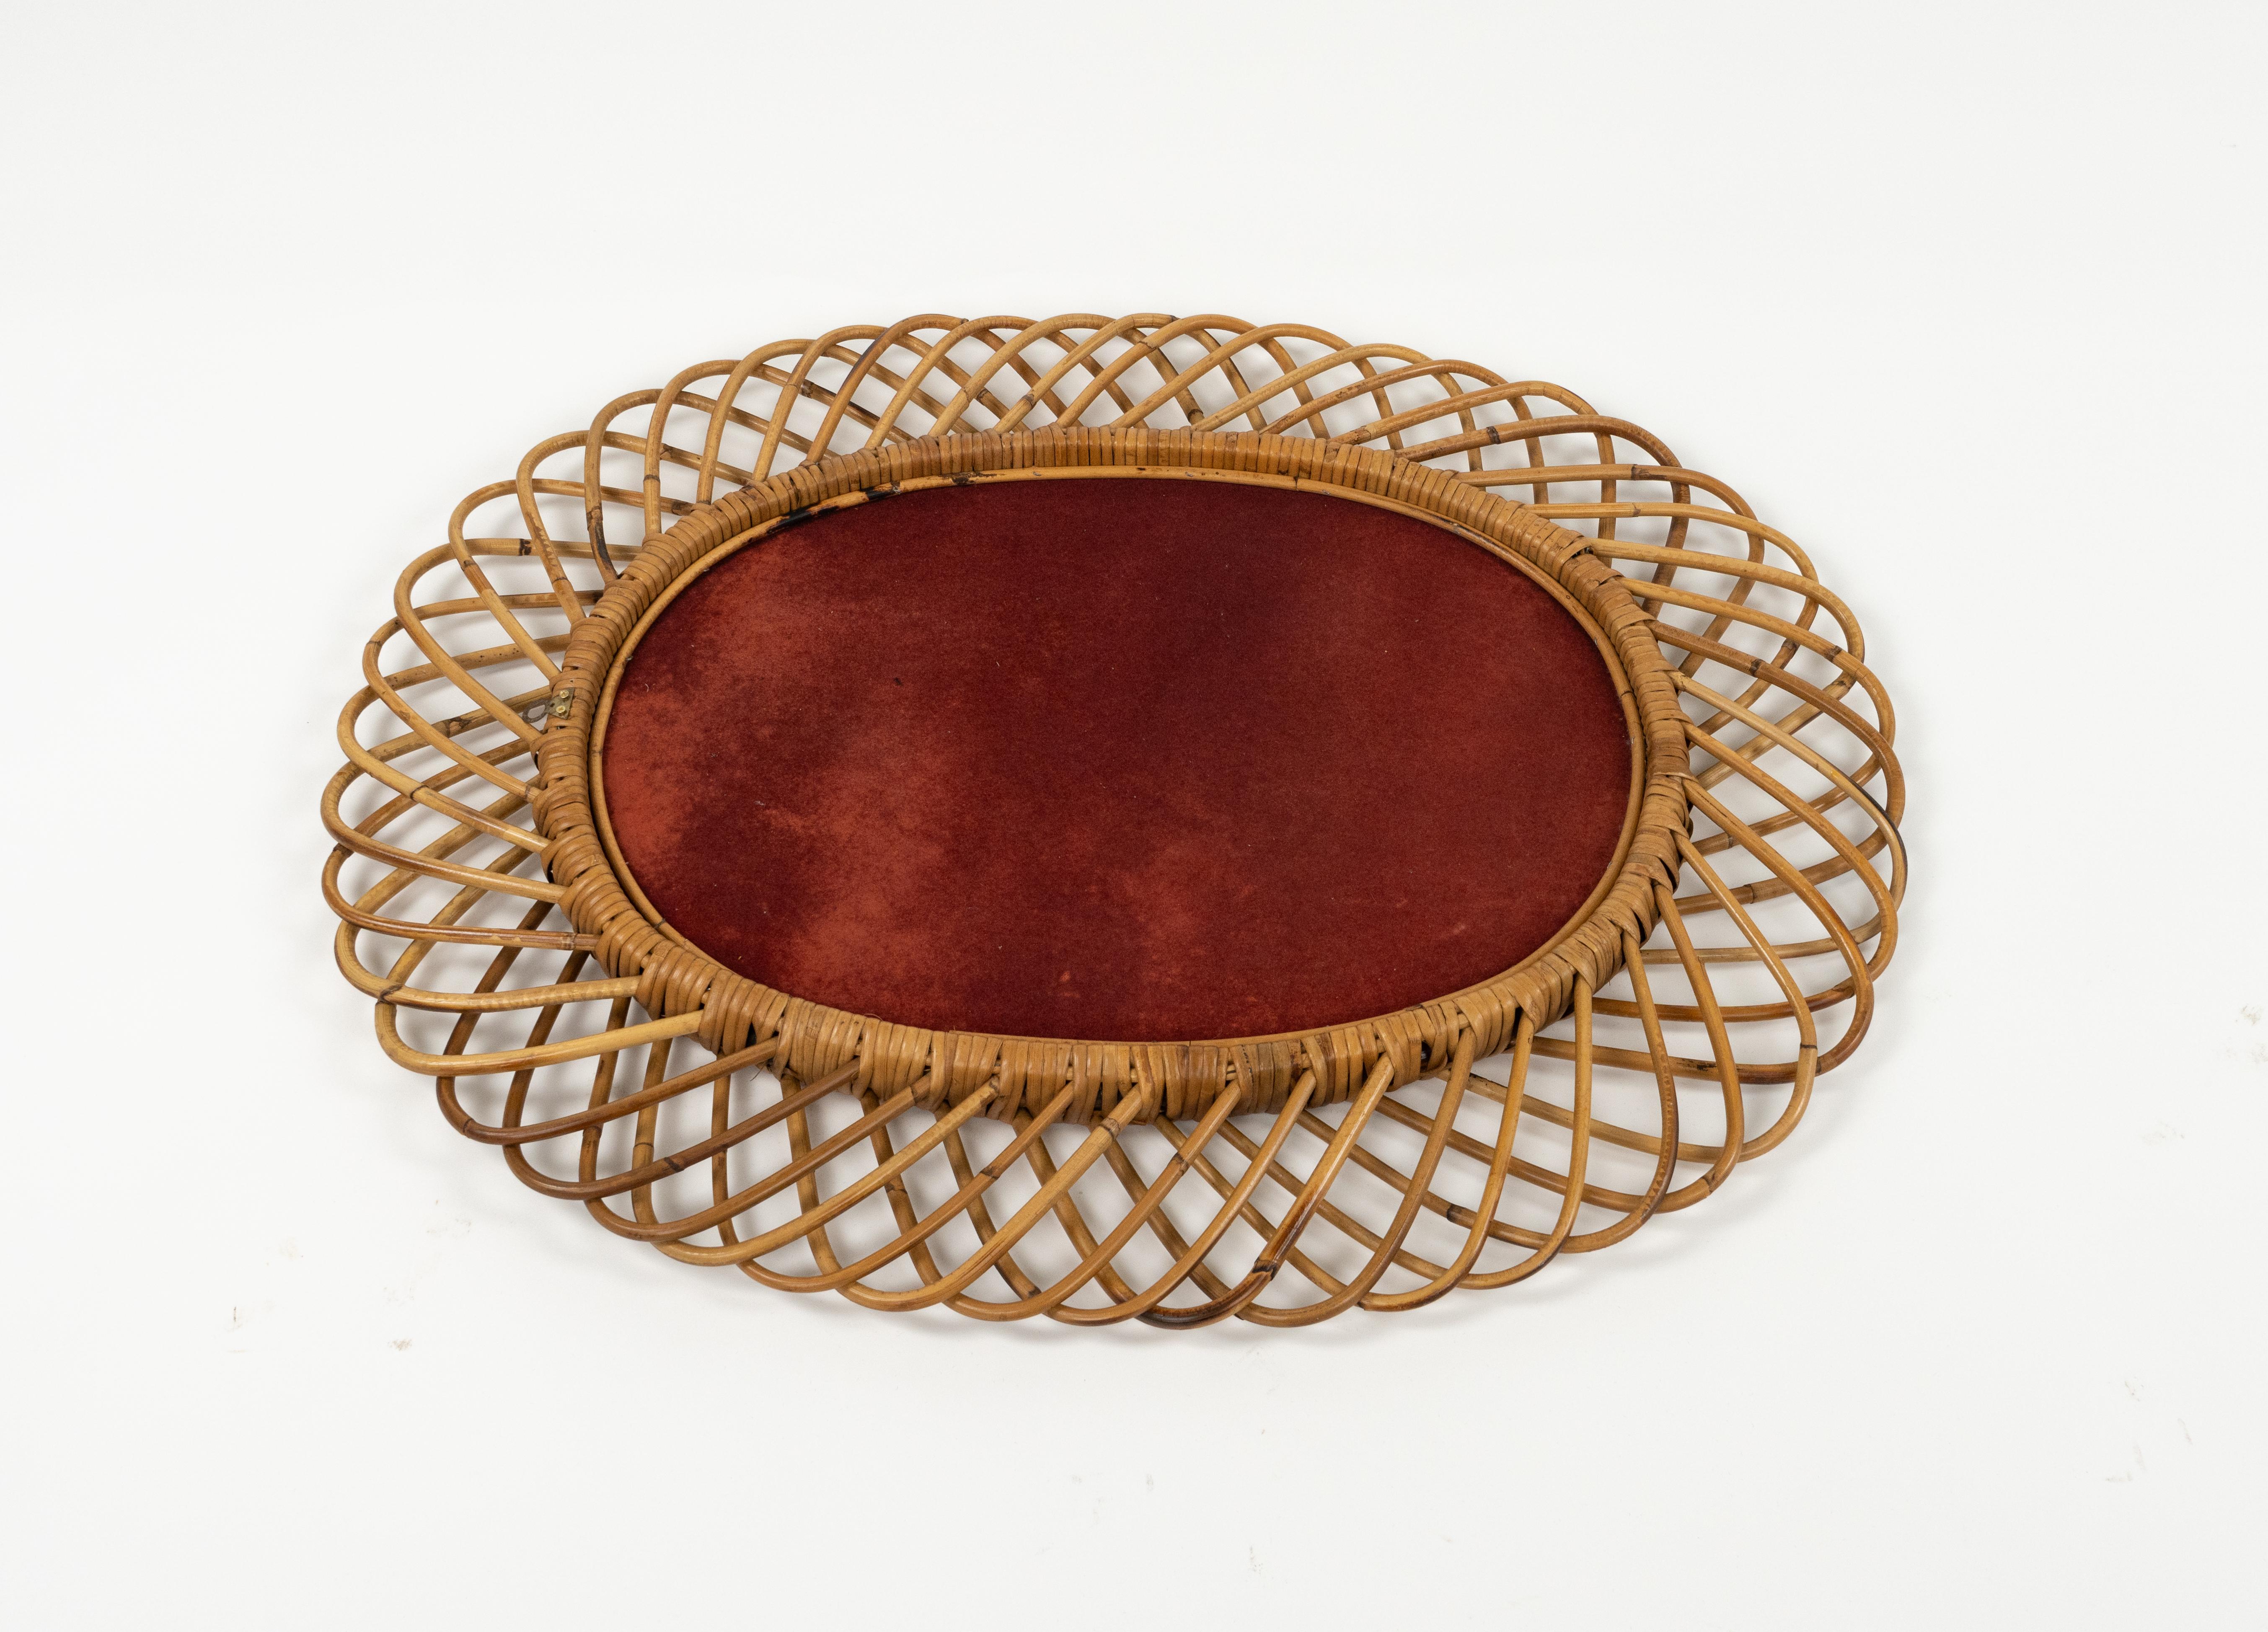 Midcentury Rattan and Bamboo Oval Wall Mirror by Franco Albini, Italy 1960s For Sale 11